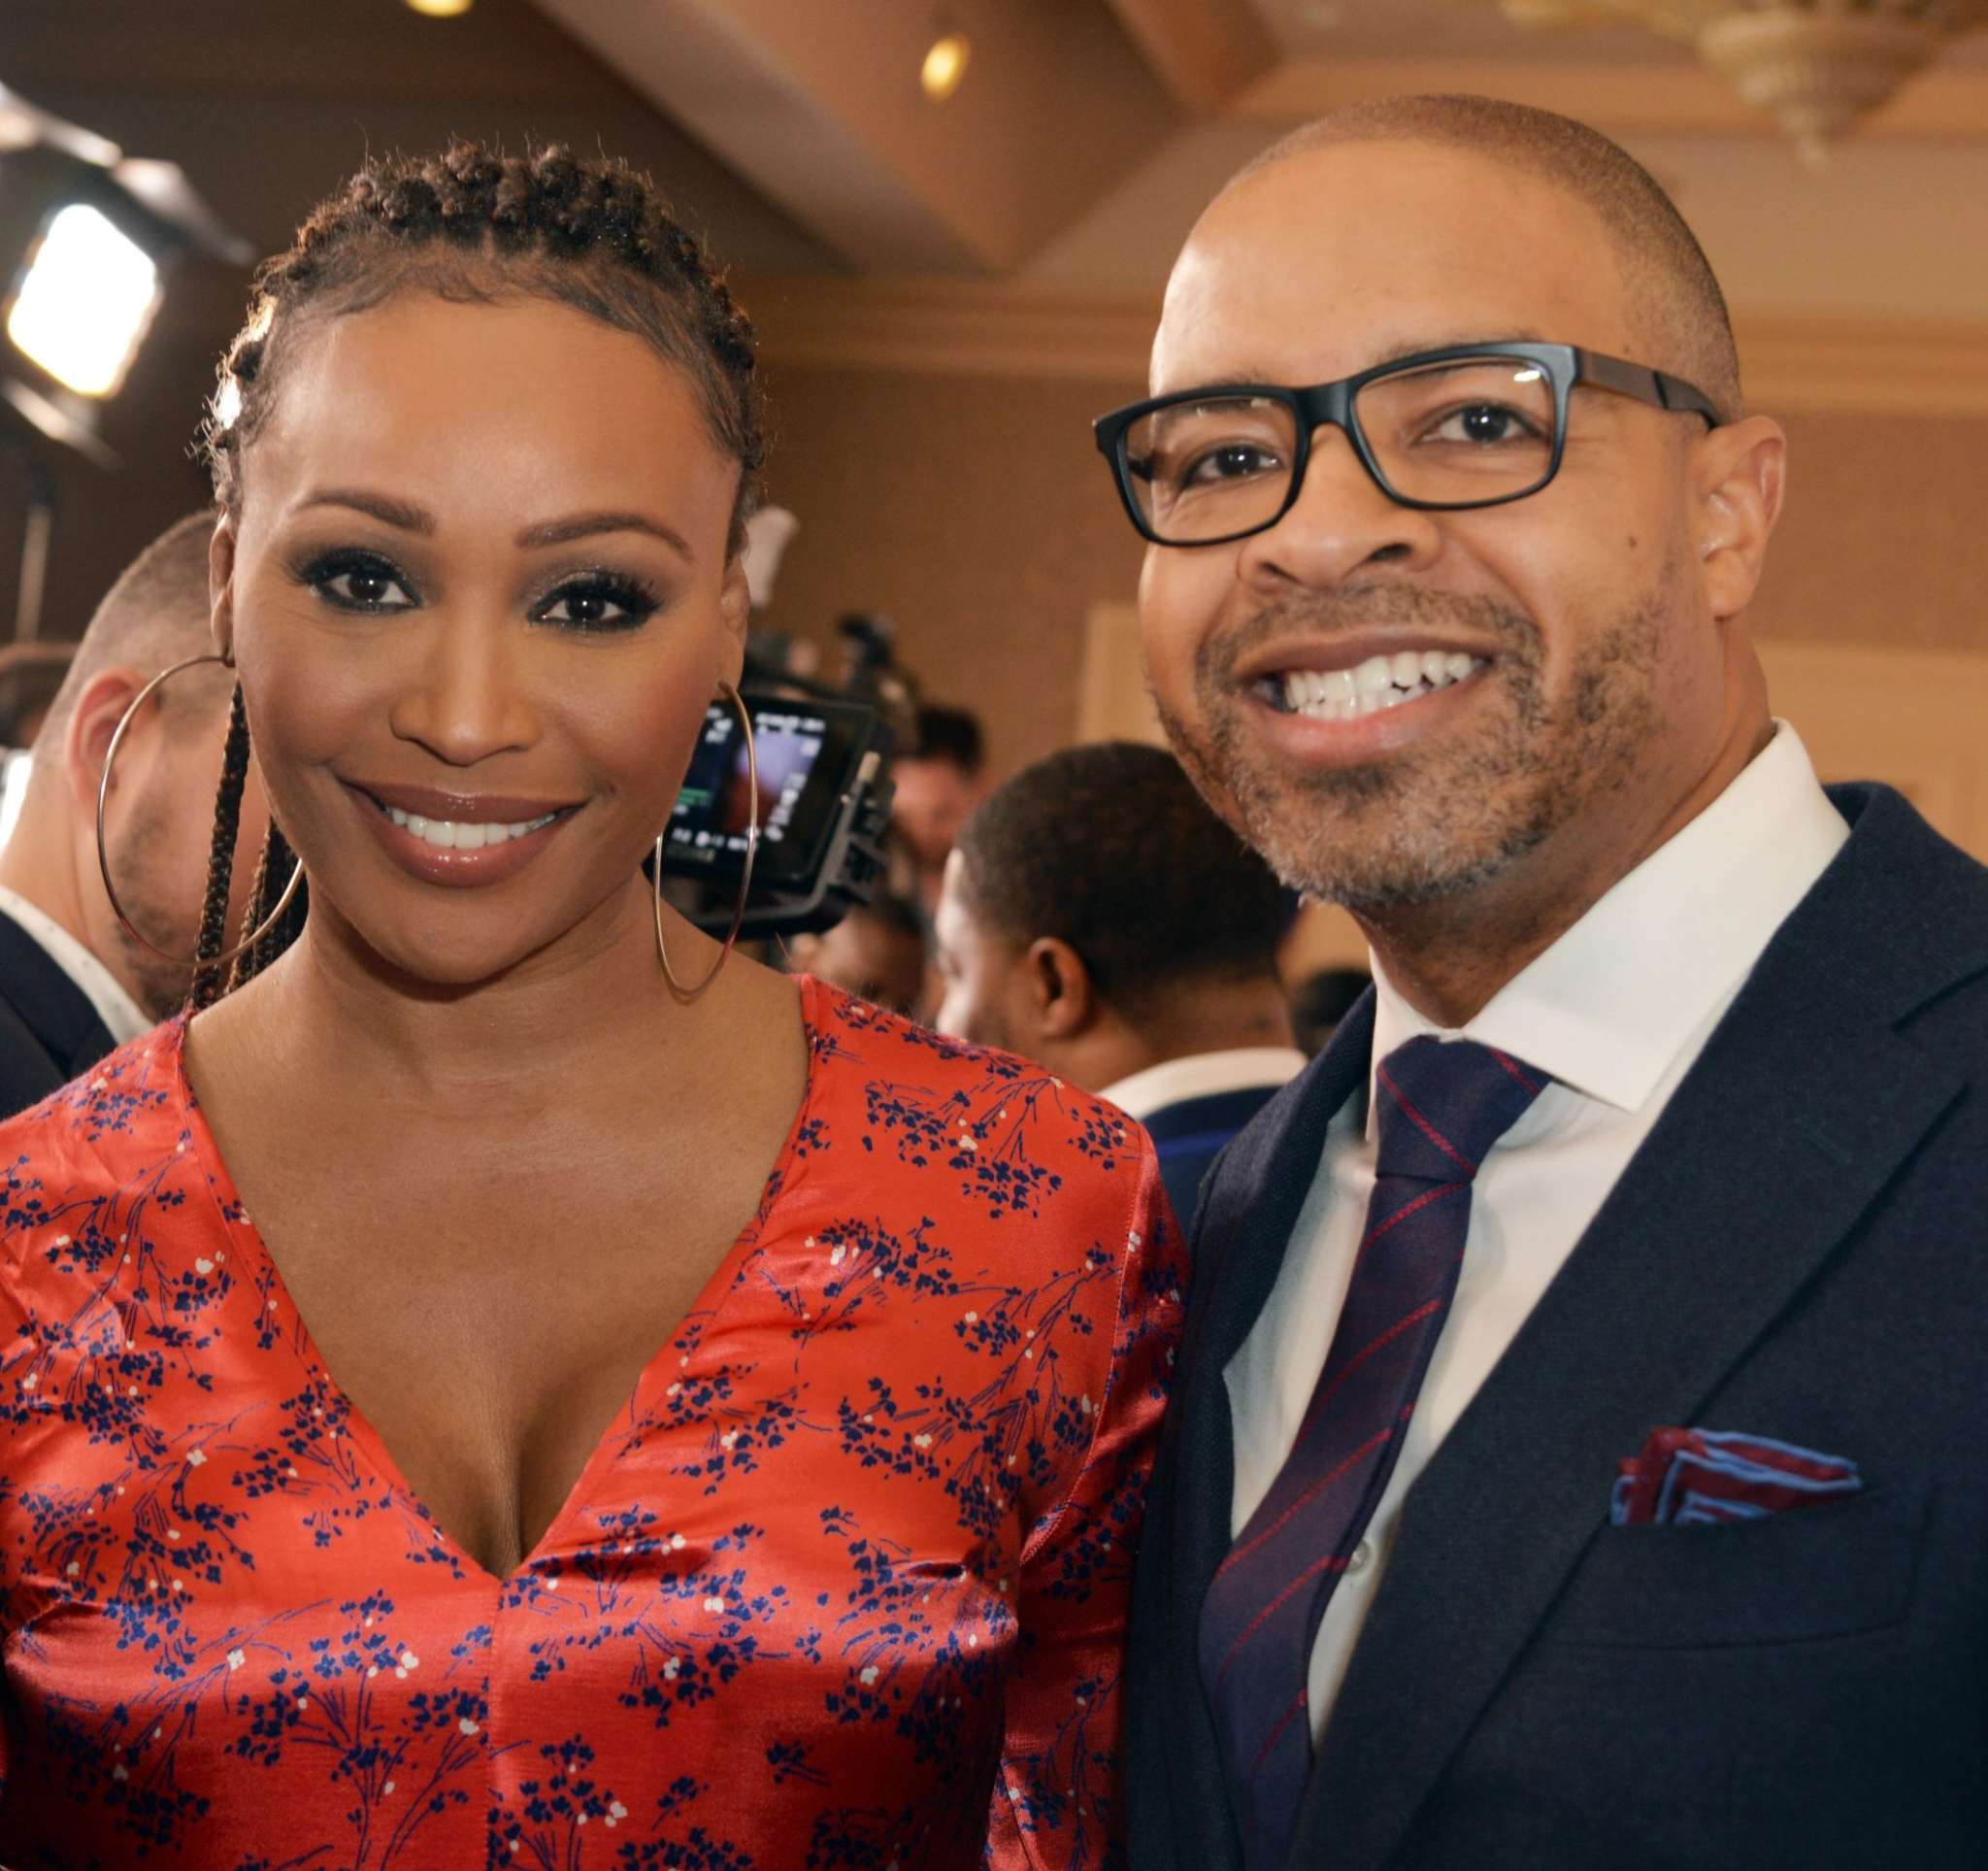 Cynthia Bailey Is Dreaming About A Honeymoon With Mike Hill - See The Pics That Inspired Her